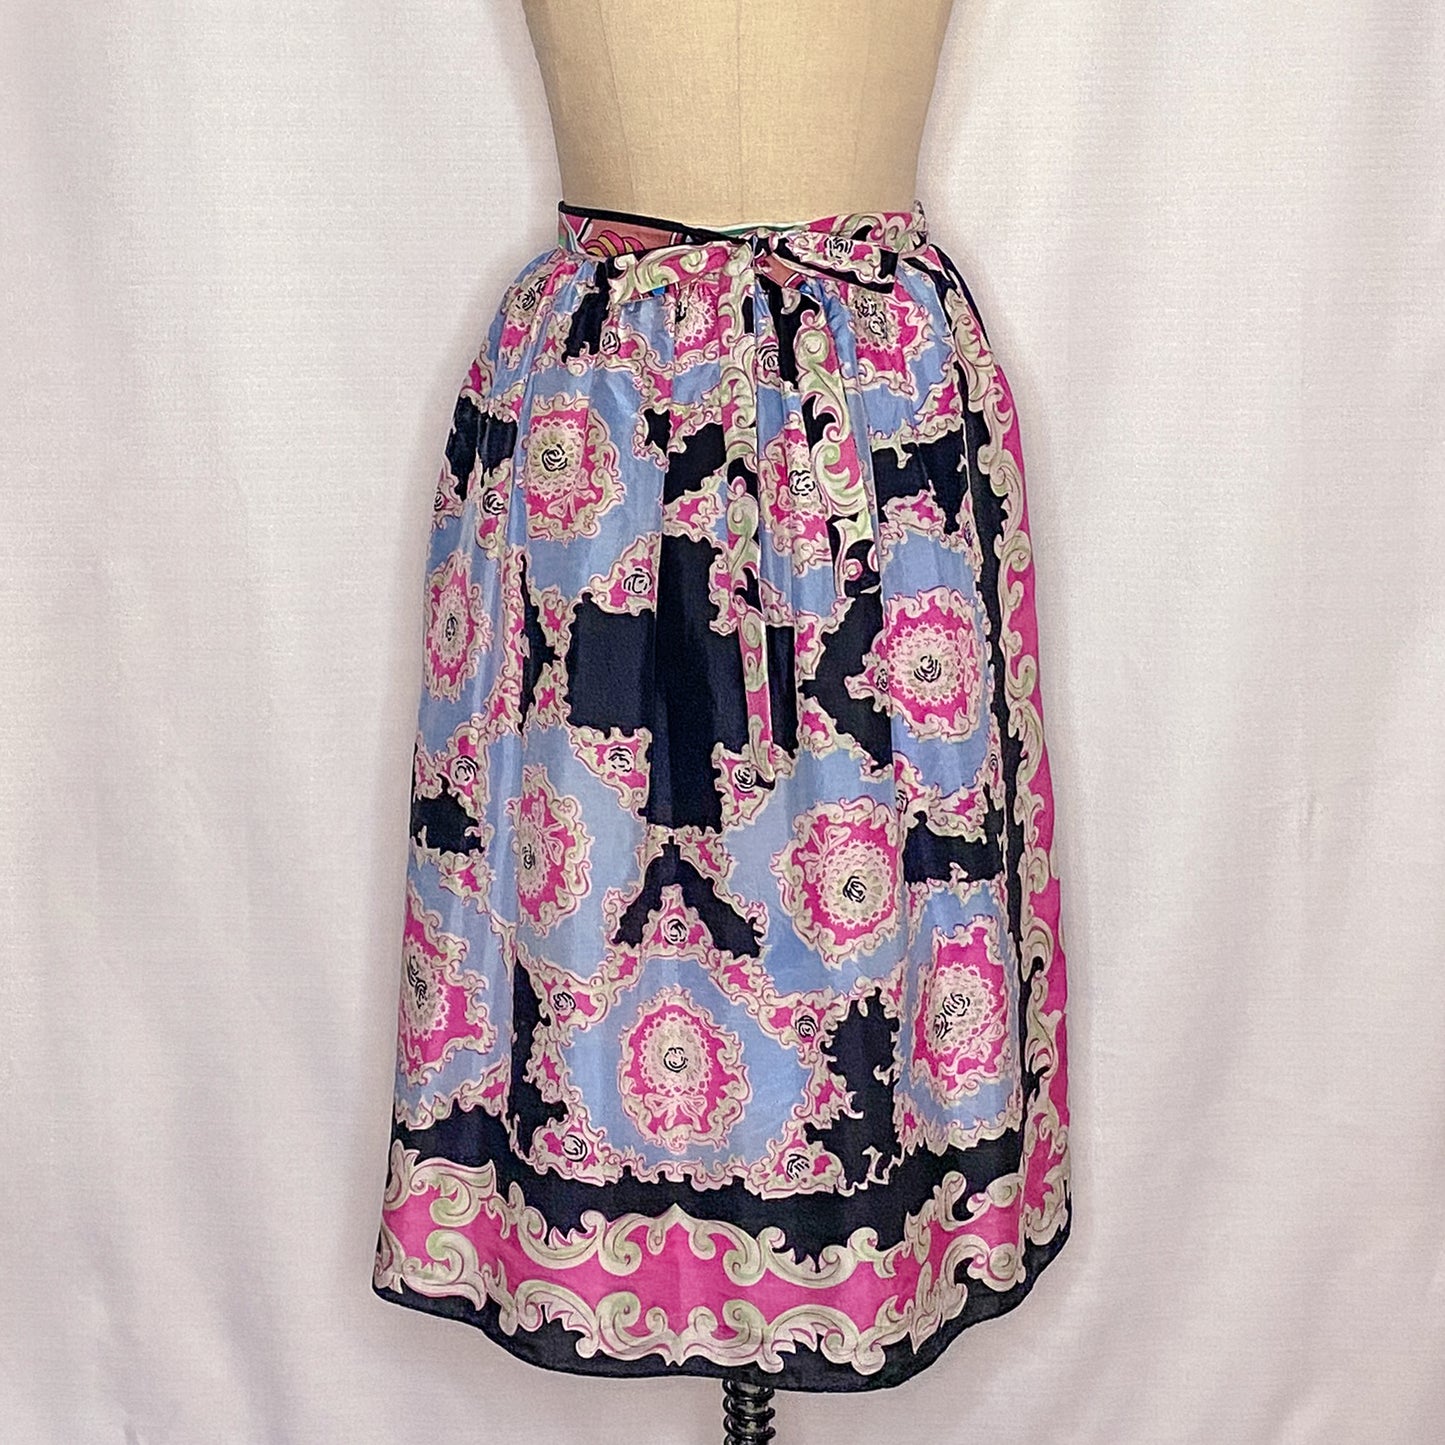 SOLD - Ellie Wrap Skirt # 16 - Size Large - One-of-a-Kind